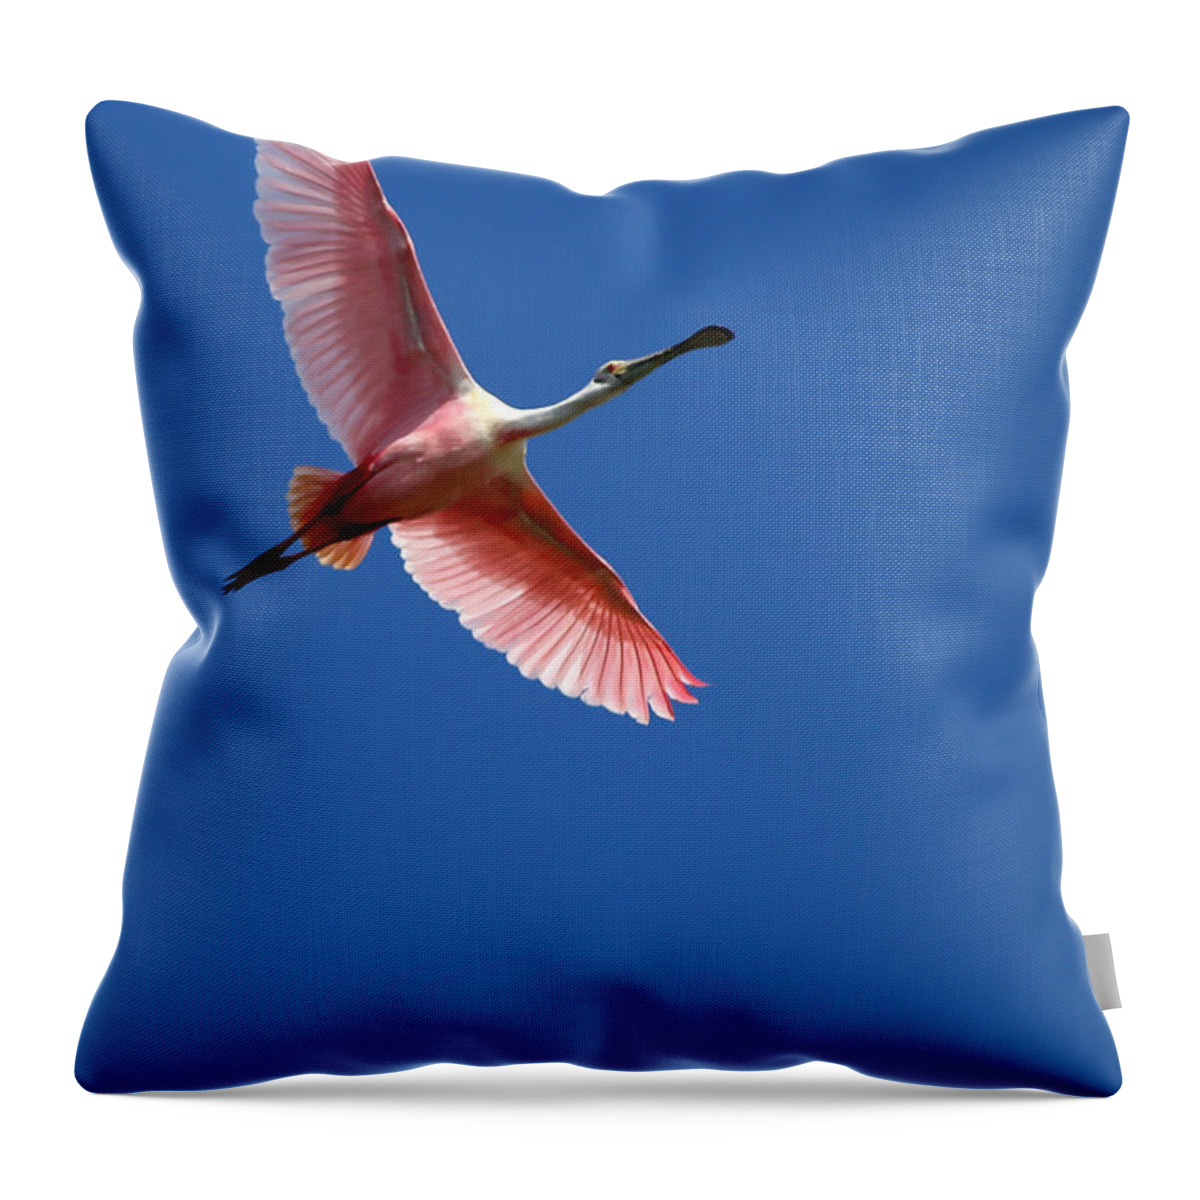 Winter Throw Pillow featuring the photograph Beautiful Pink Roseate Spoonbill by Sabrina L Ryan